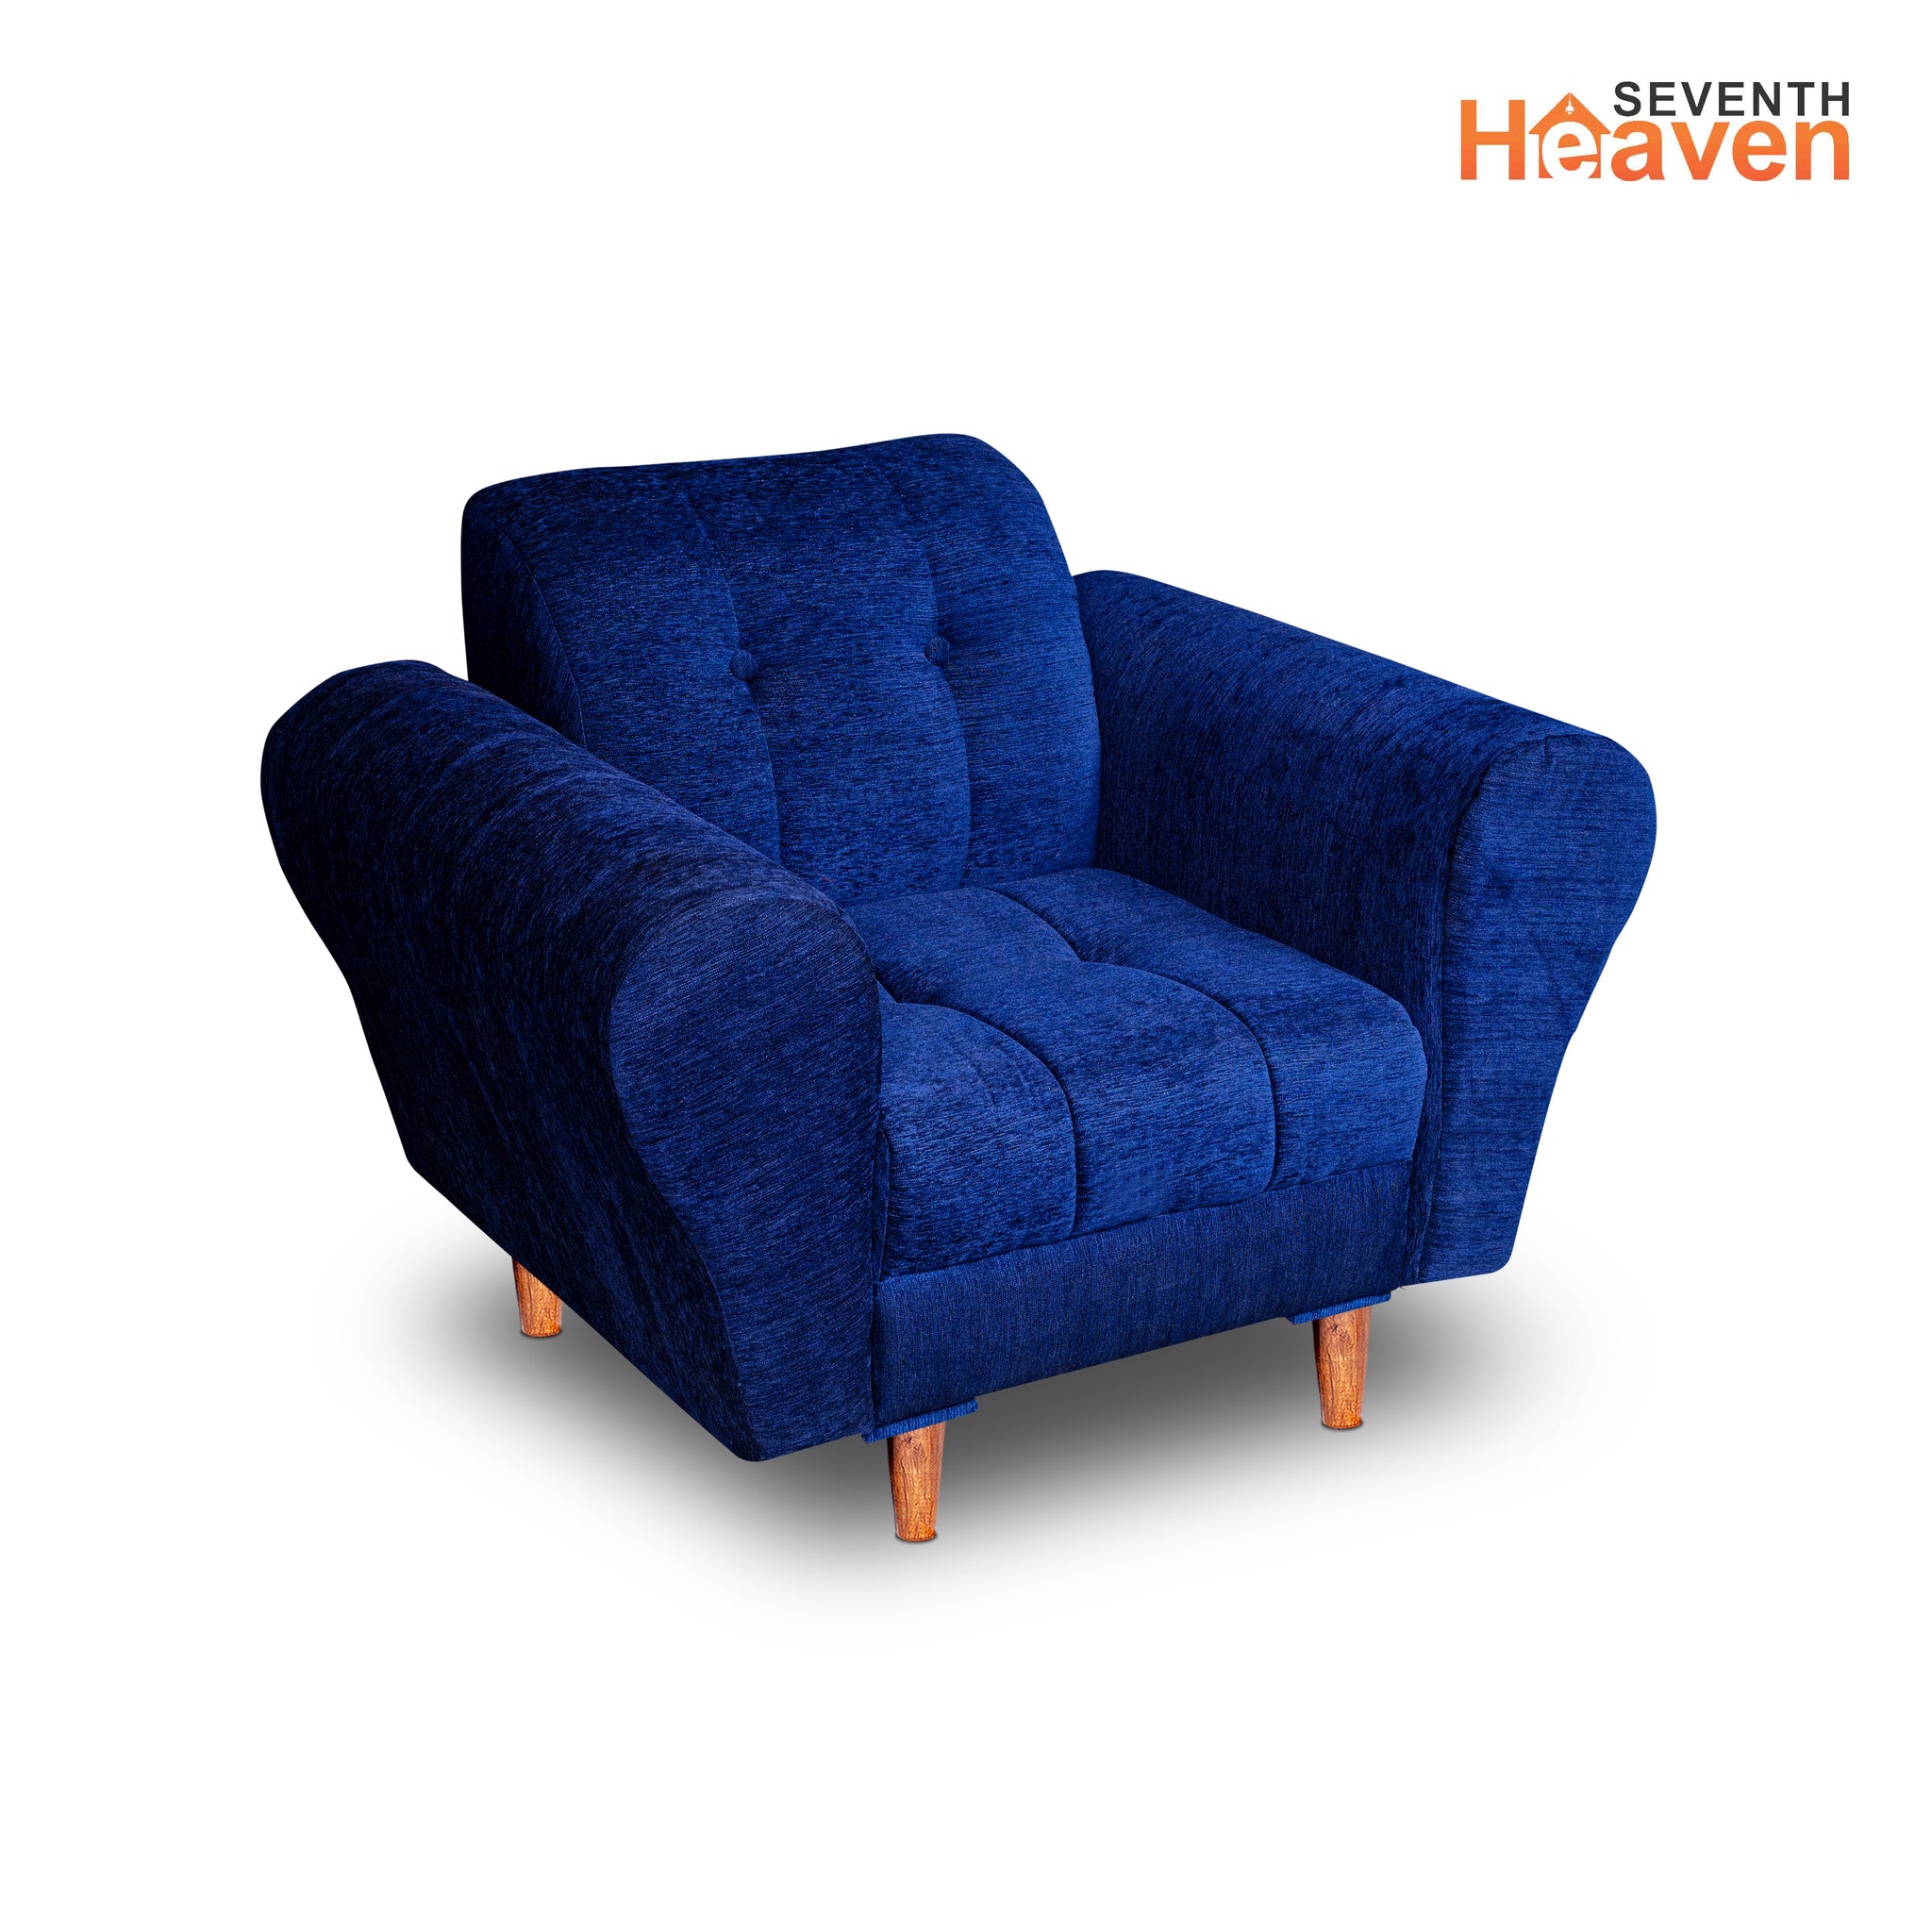 Seventh Heaven Milan 1 Seater Wooden Sofa Set Modern & Elegant Smart Furniture Range for luxurious homes, living rooms and offices. Blue Colour Molphino fabric with sheesham polished wooden legs.